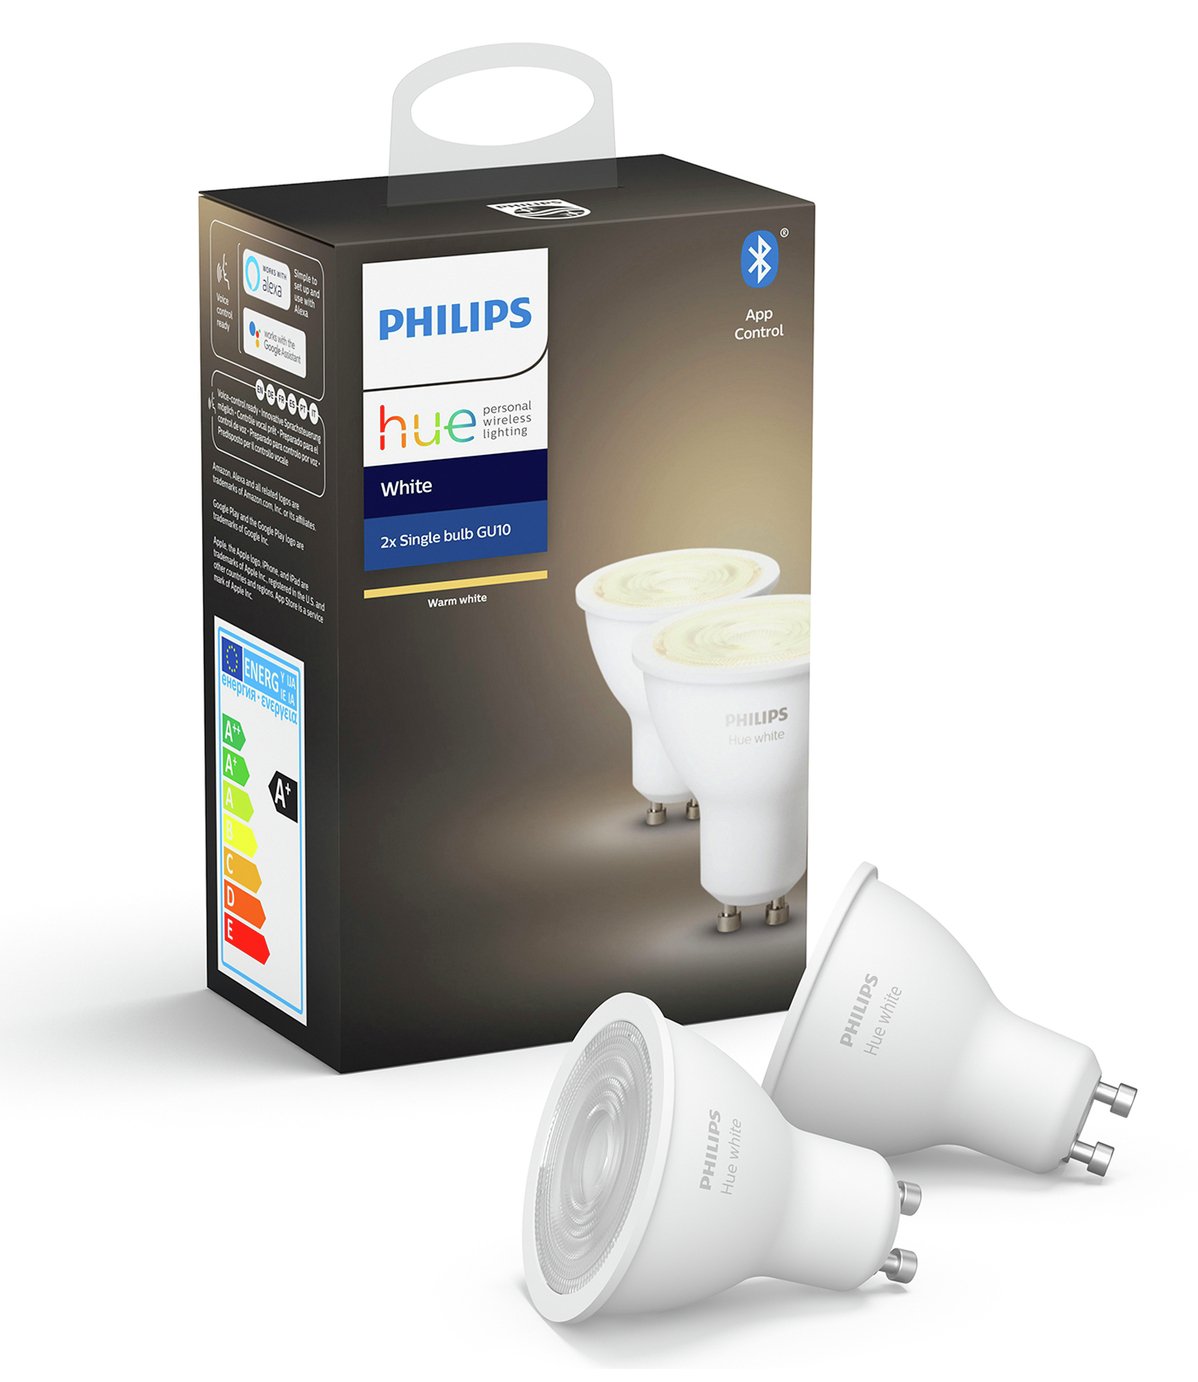 Philips Hue GU10 White Smart Bulbs with Bluetooth Review